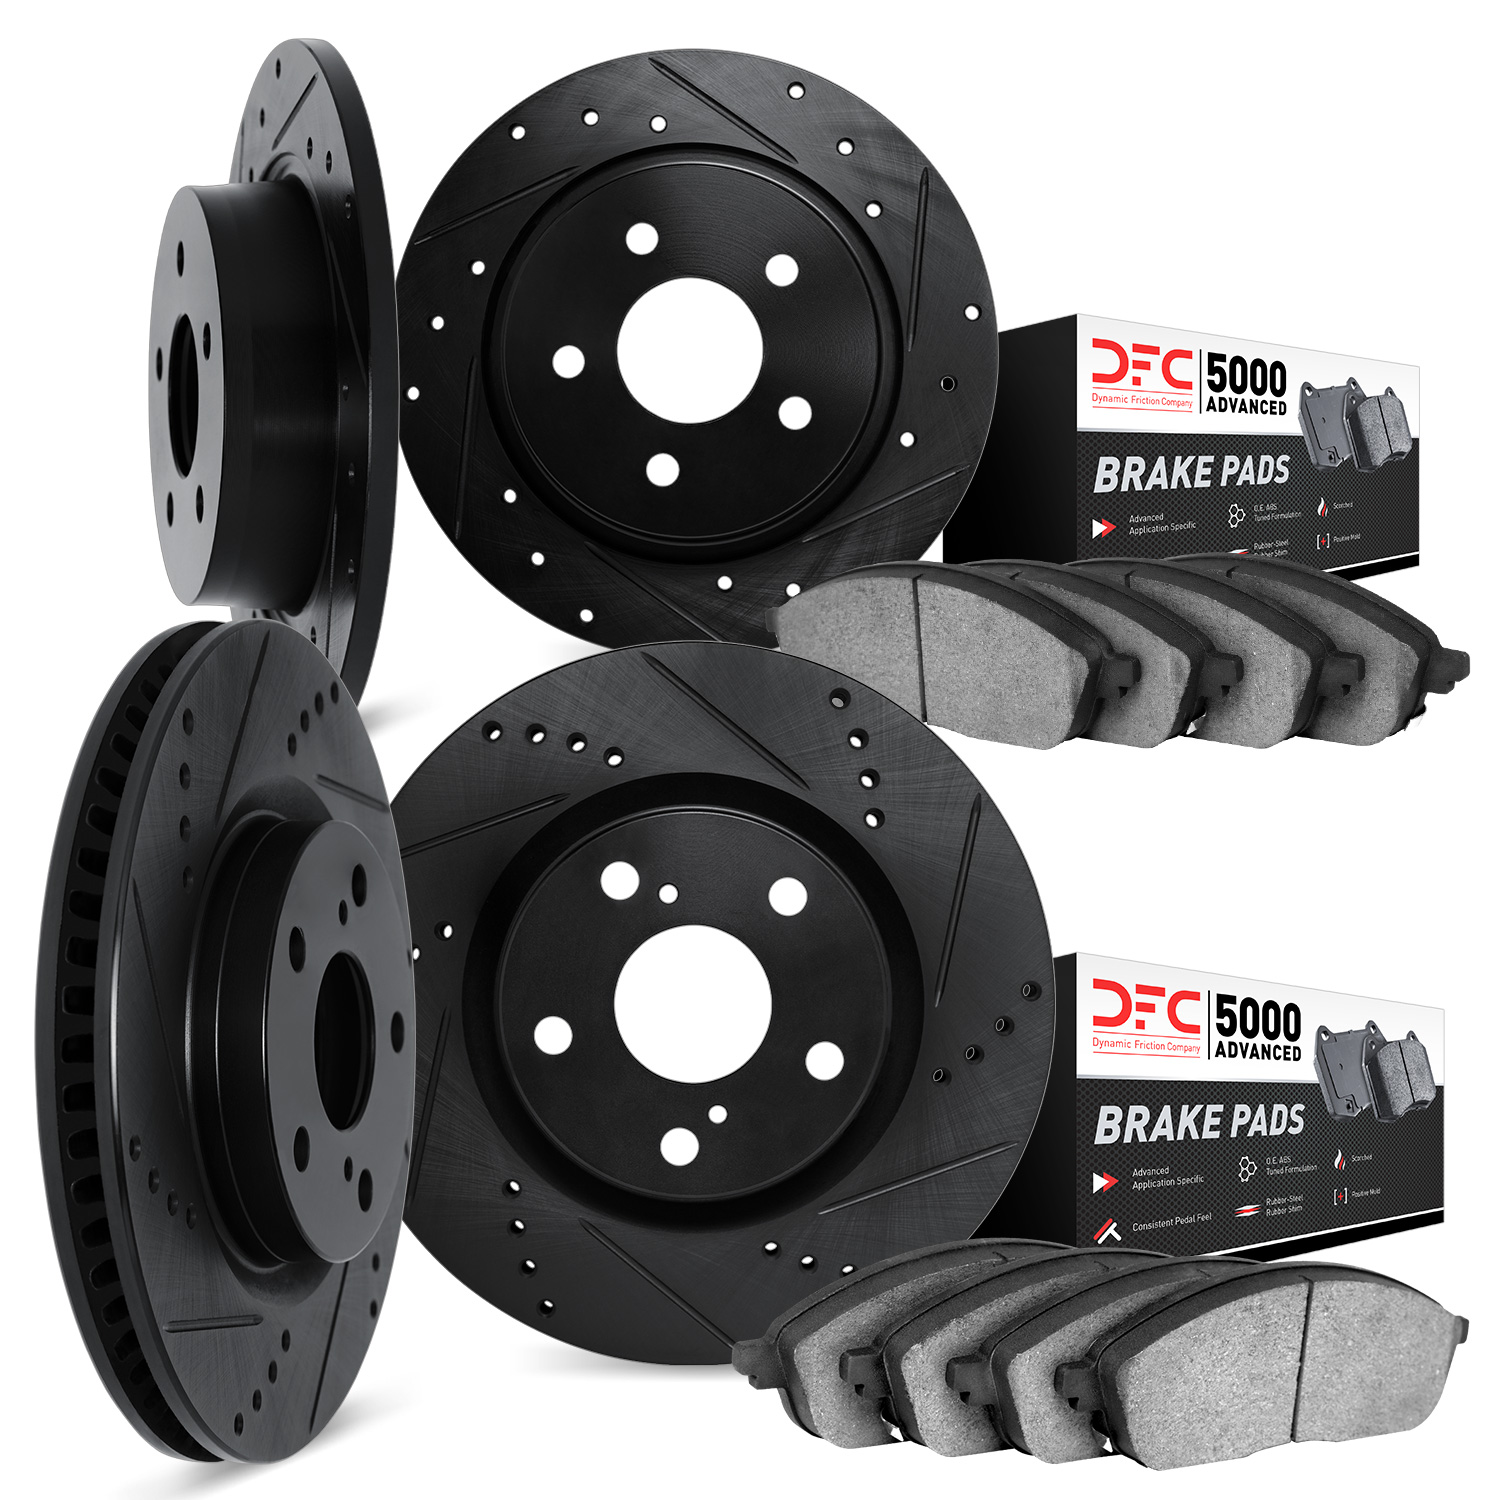 8504-13014 Drilled/Slotted Brake Rotors w/5000 Advanced Brake Pads Kit [Black], Fits Select Subaru, Position: Front and Rear